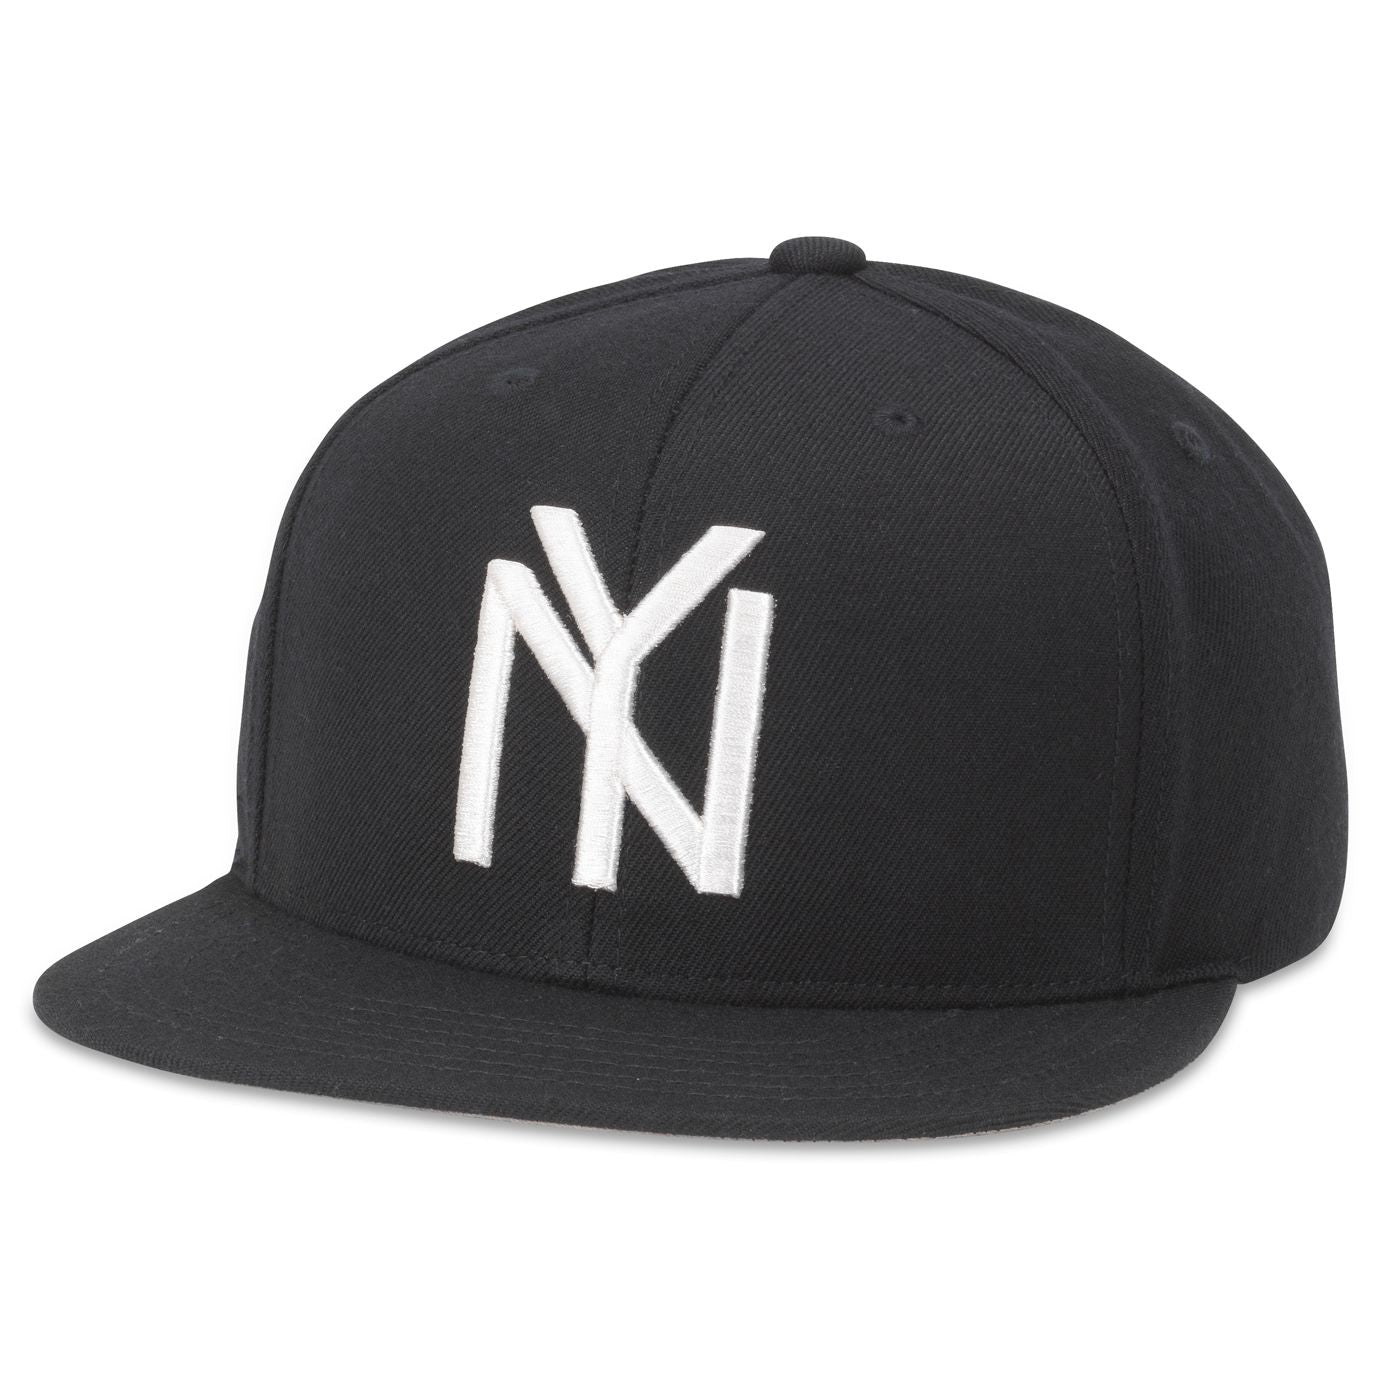 American Needle NY Black Yankees NL Archive 400 Series Cap Black 21006A-NBY.